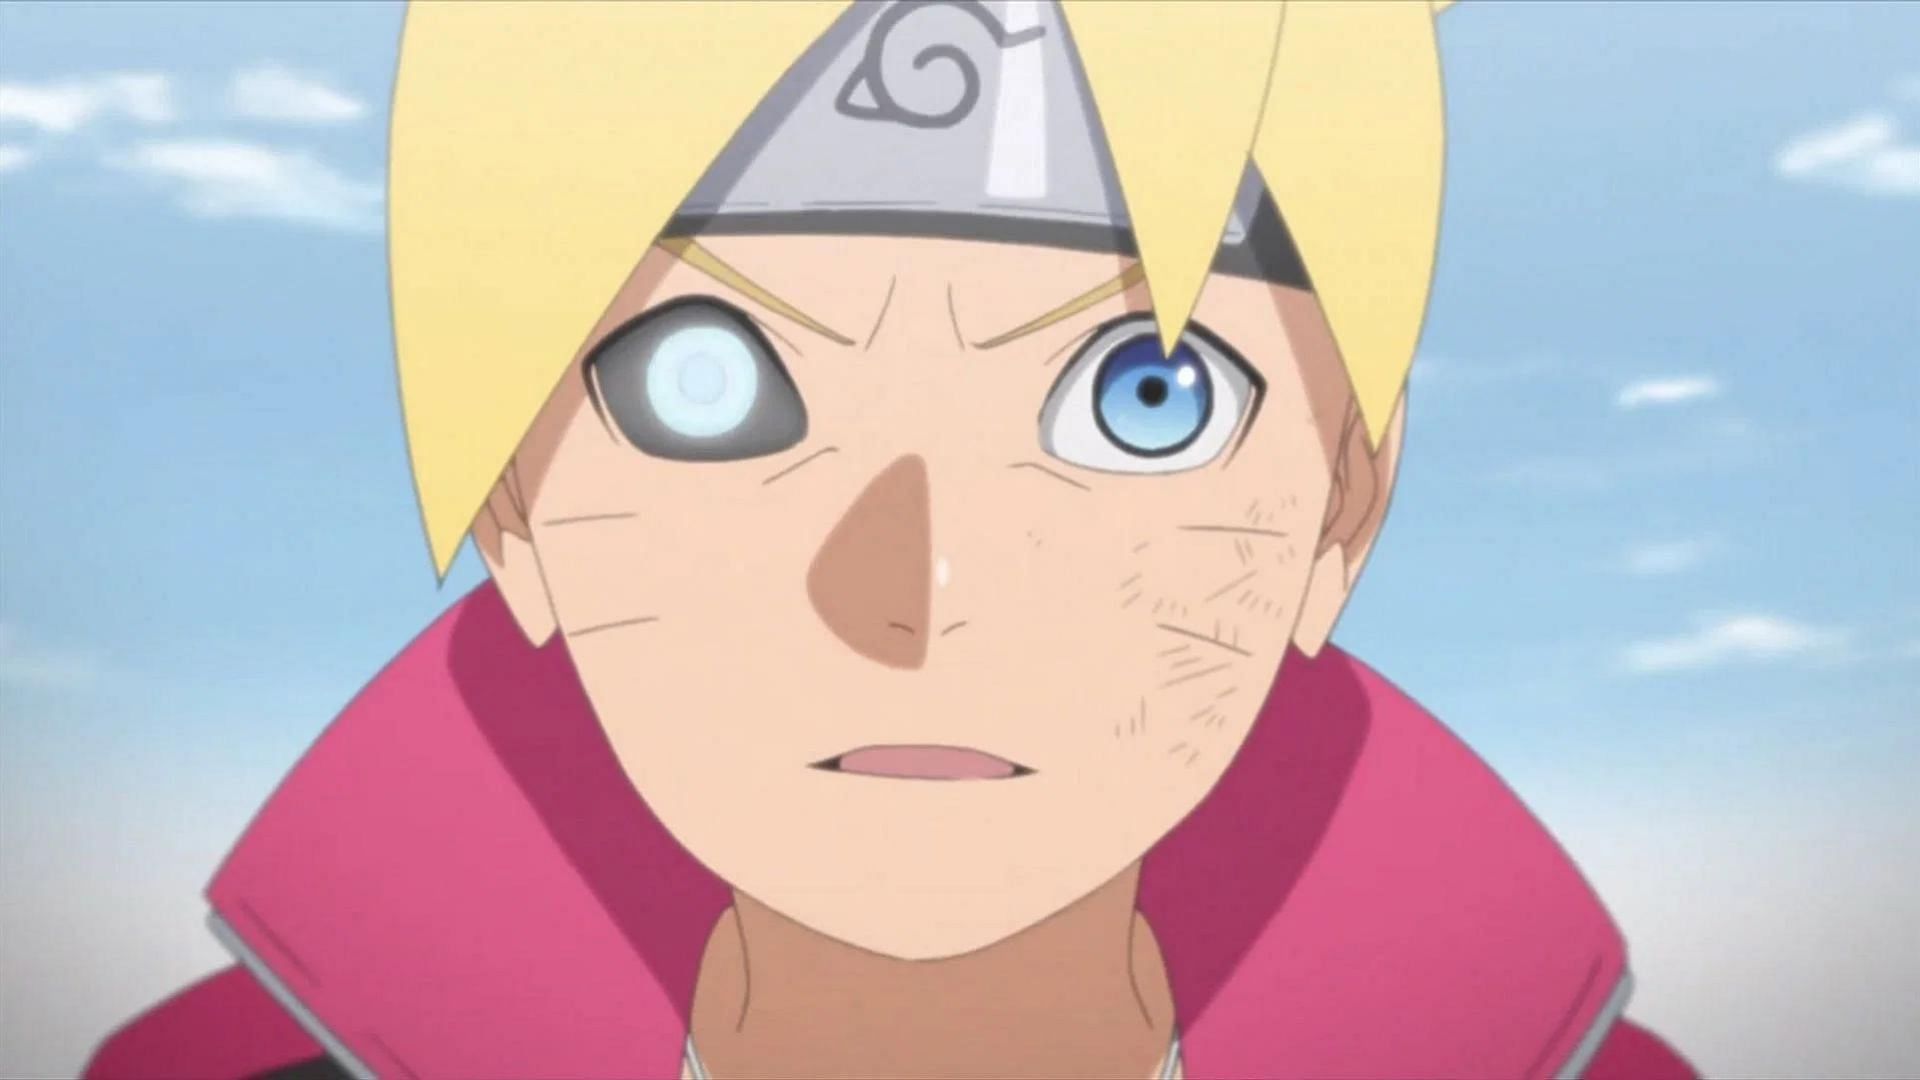 Boruto Two Blue Vortex chapter 4 spoilers: Expected release date